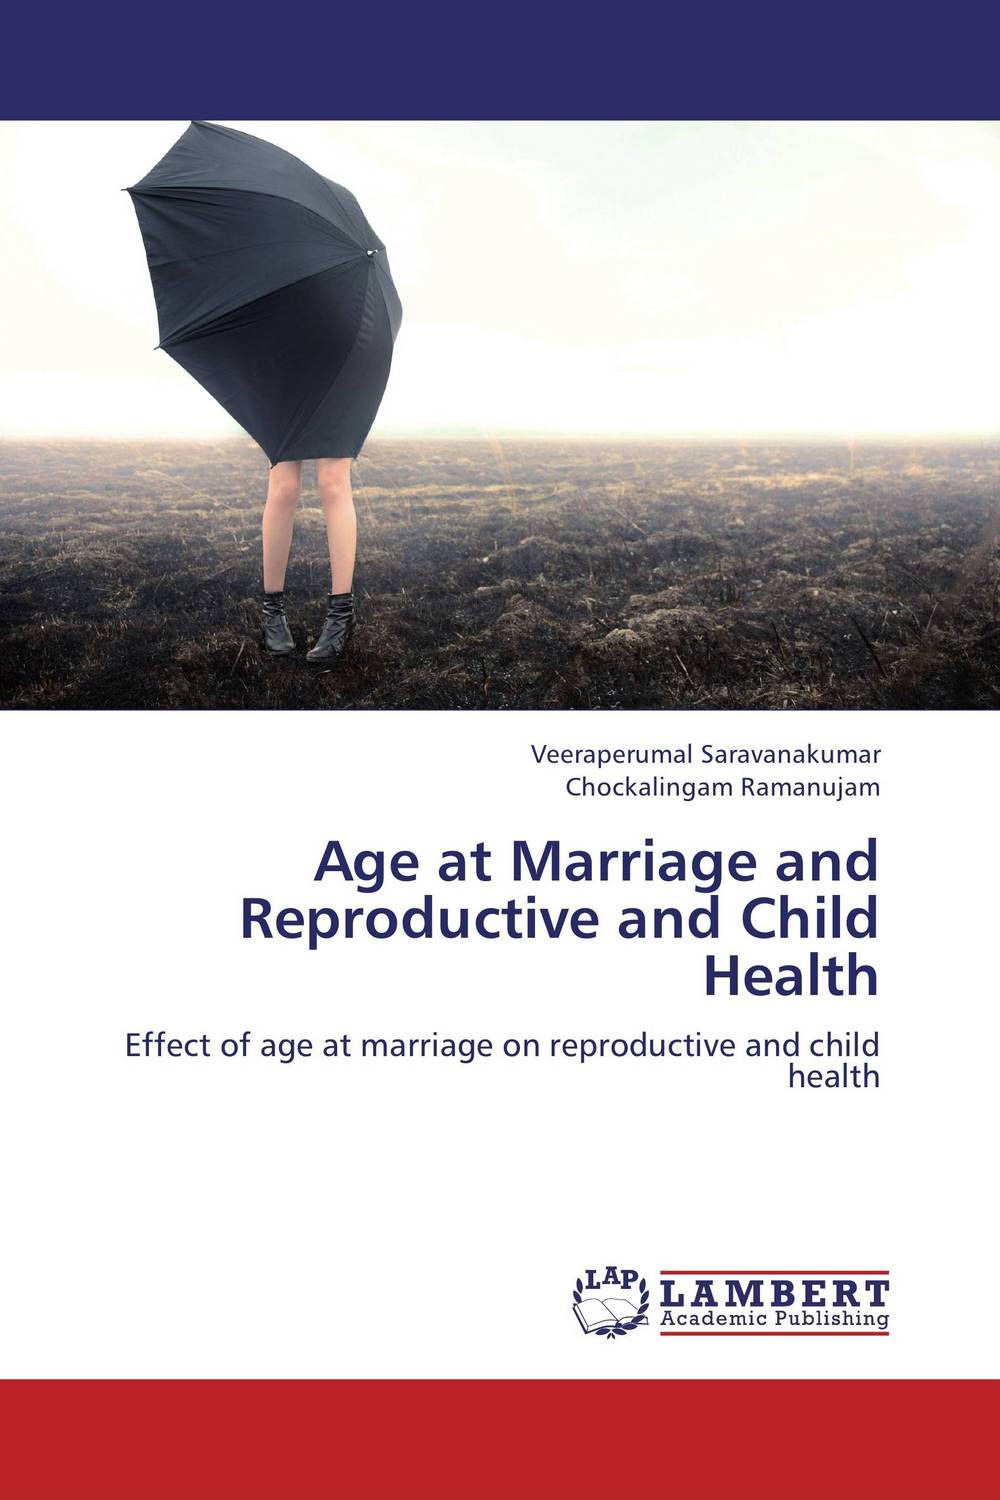 Age at Marriage and Reproductive and Child Health